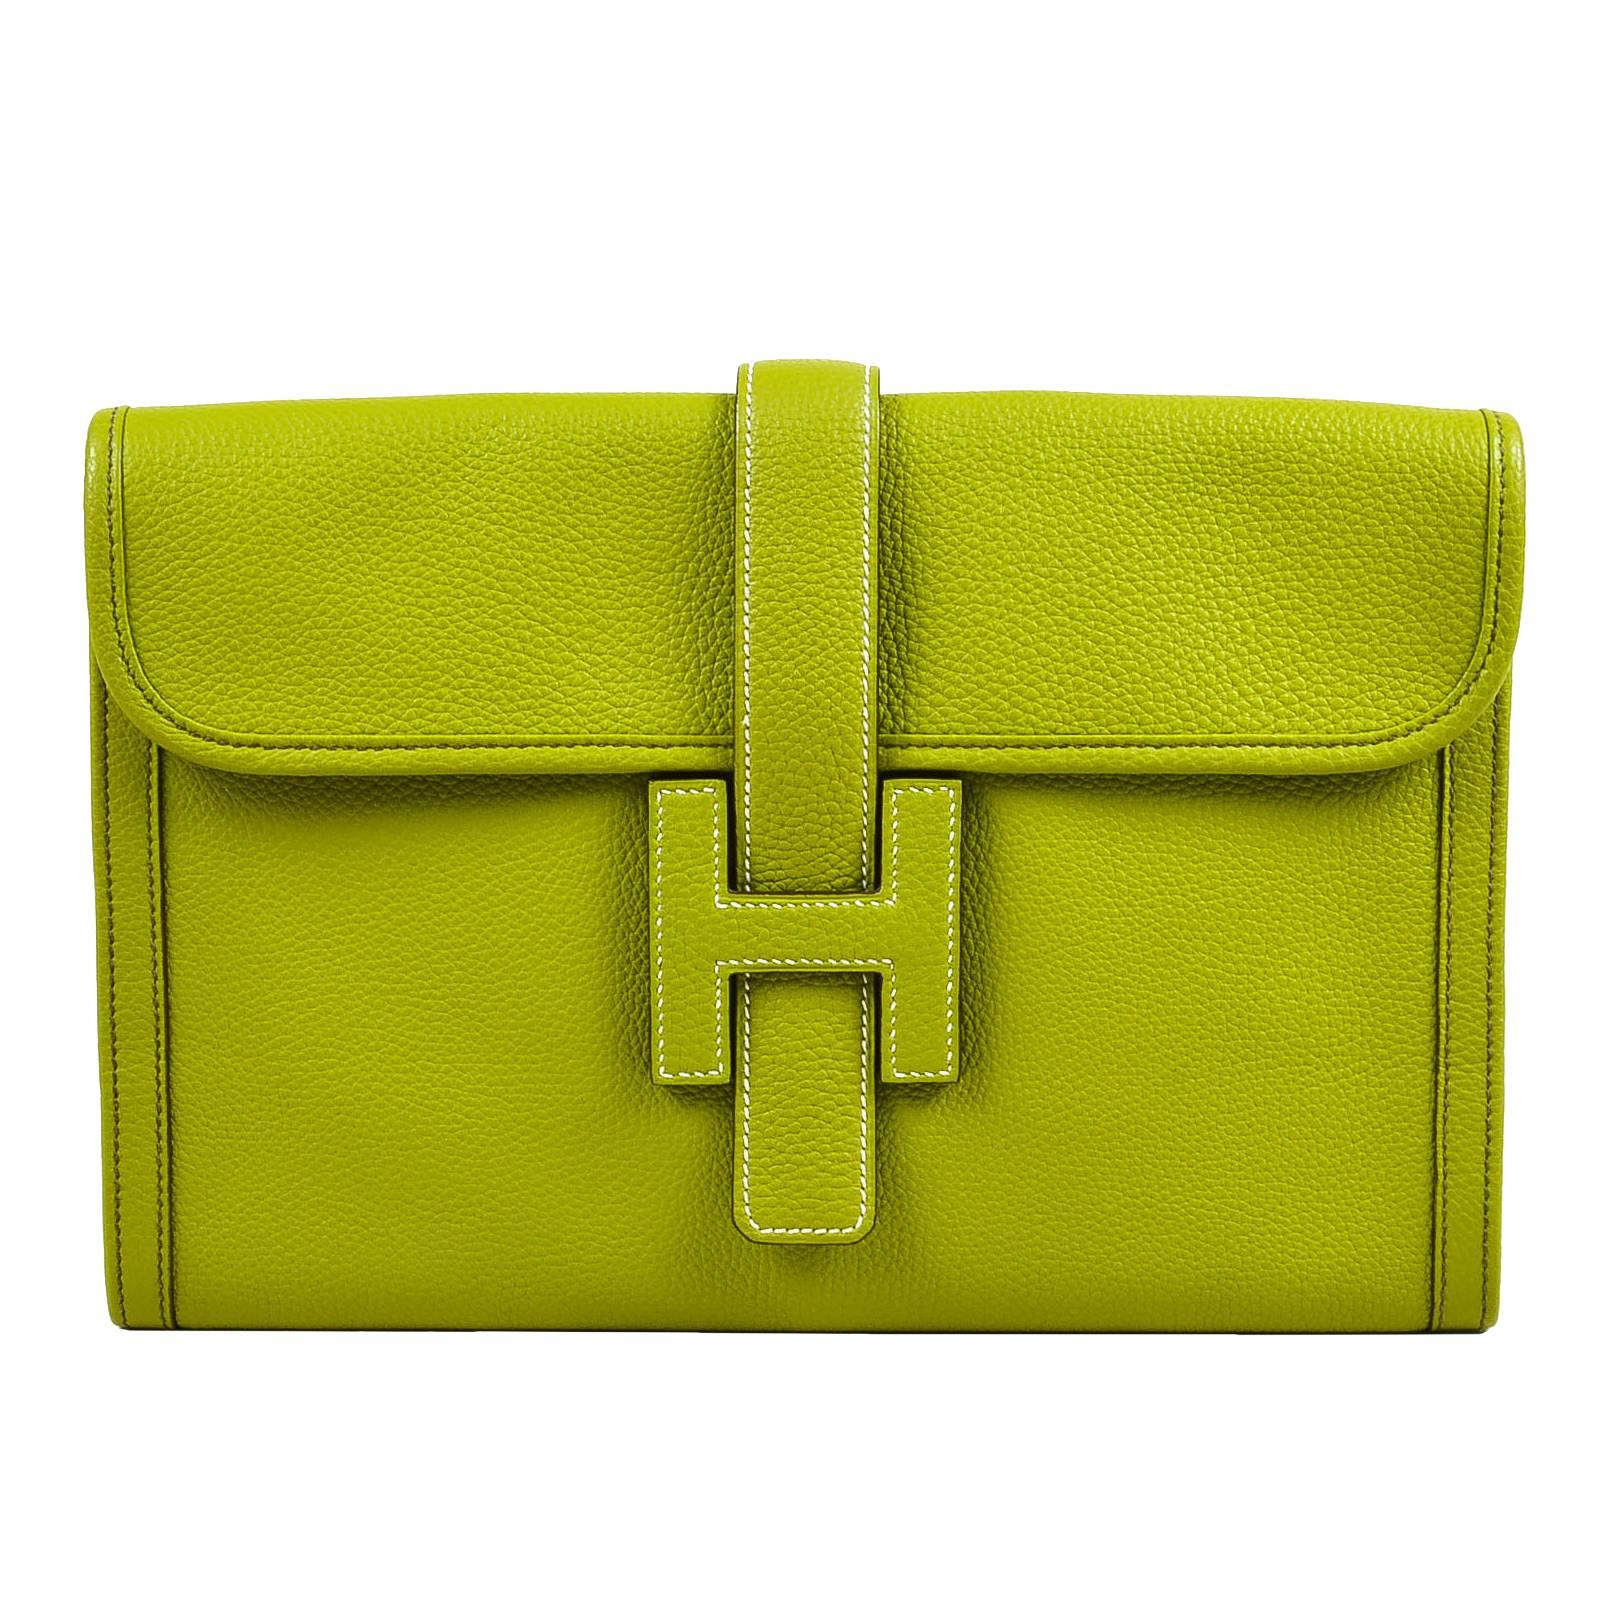 Hermes Vert Anis Green Togo Leather "Jige PM" Flap Clutch Bag For Sale